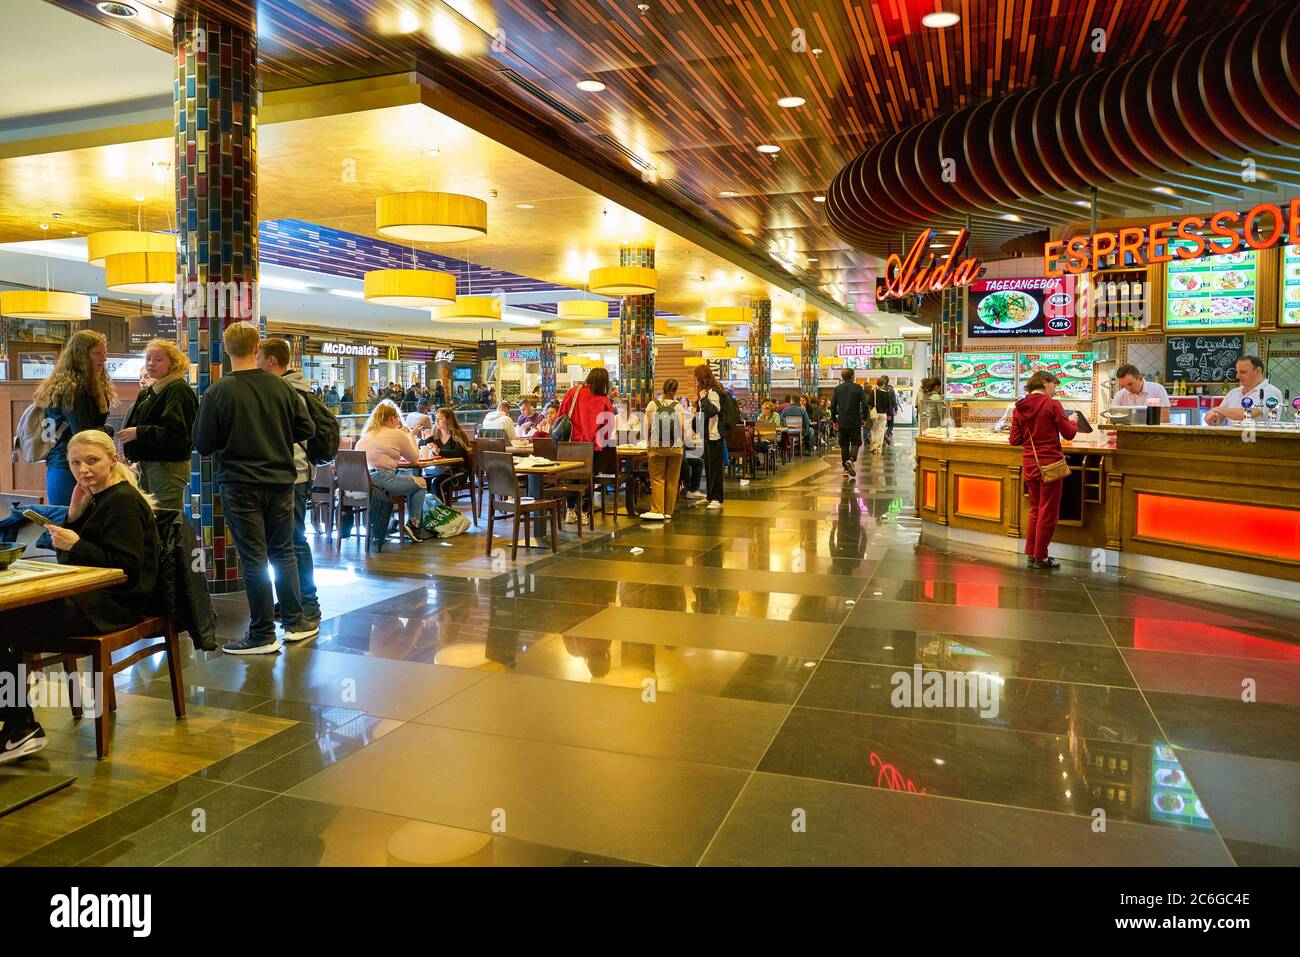 BERLIN, GERMANY - CIRCA SEPTEMBER, 2019: food court at Mall of Berlin. Stock Photo